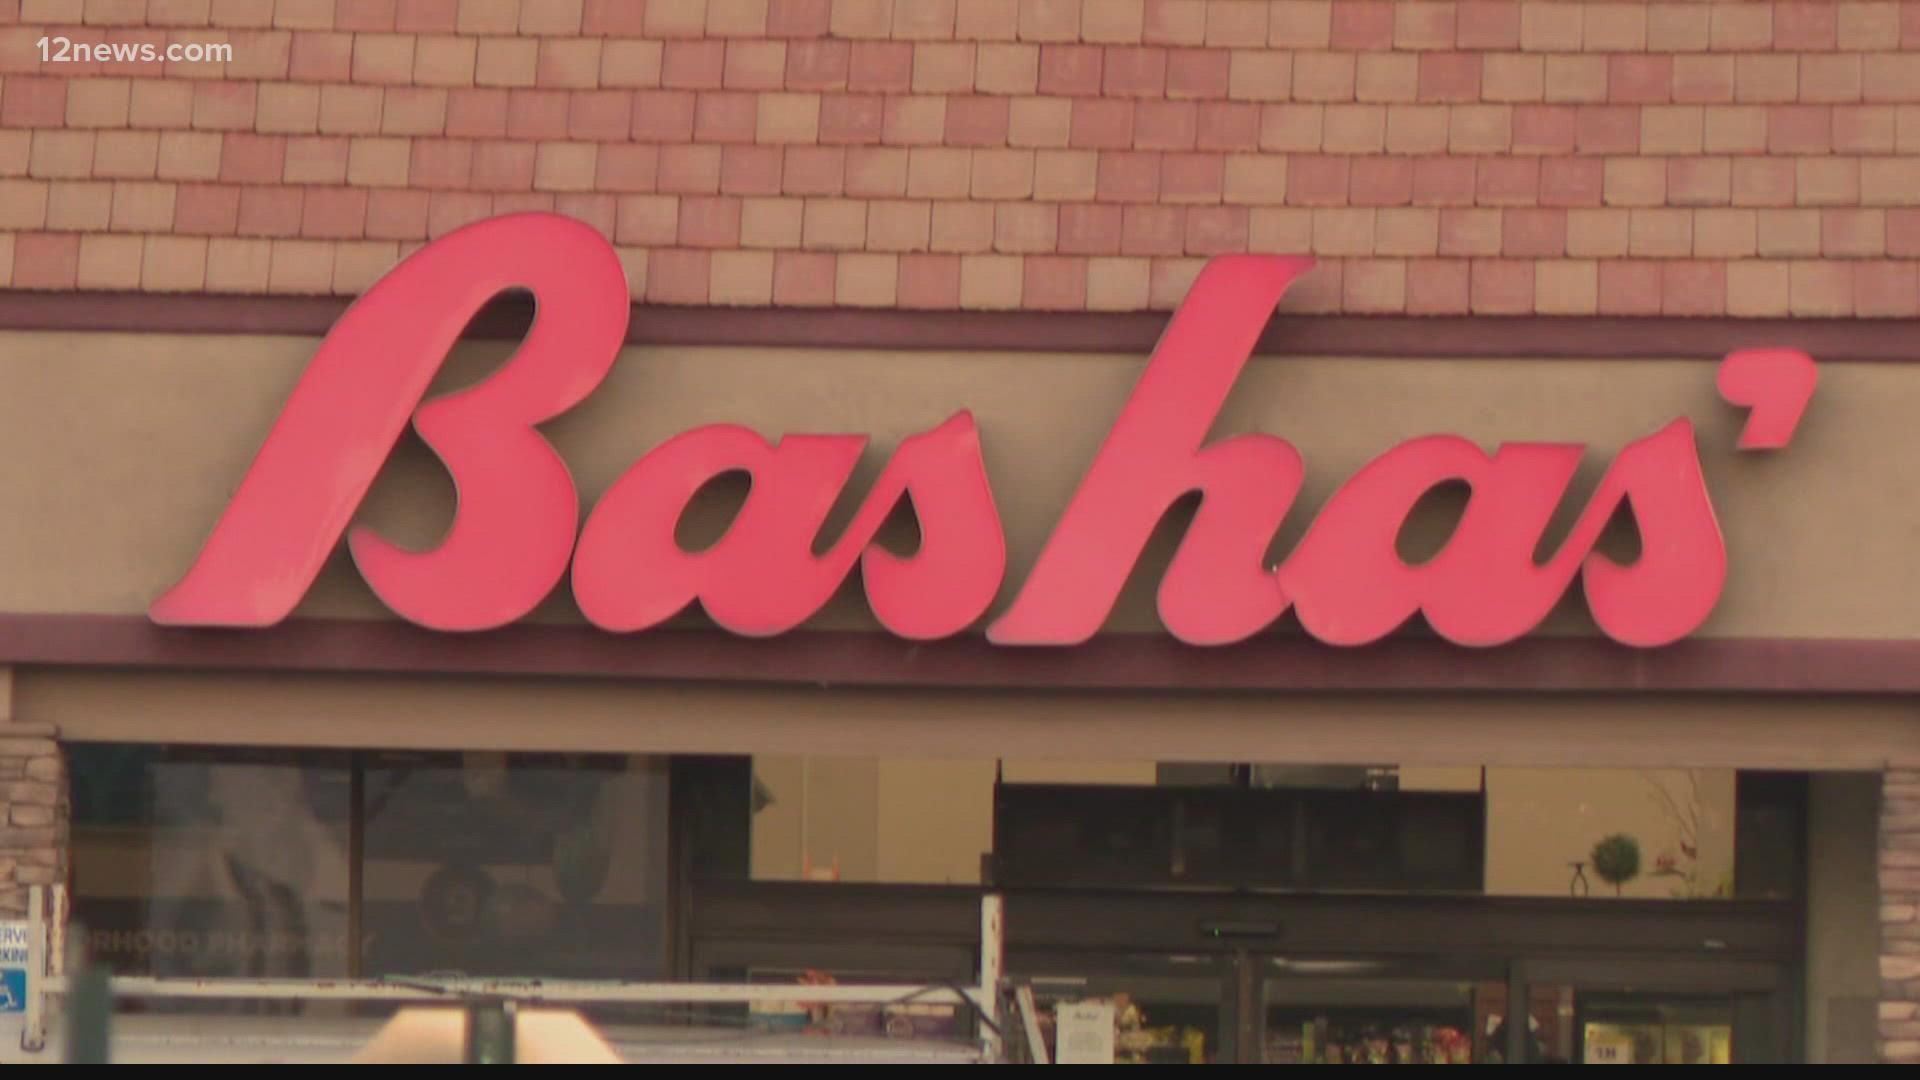 Many Arizonans are familiar with Bashas' and their family of stores. But now the “hometown grocer” has entered a new chapter of growth.